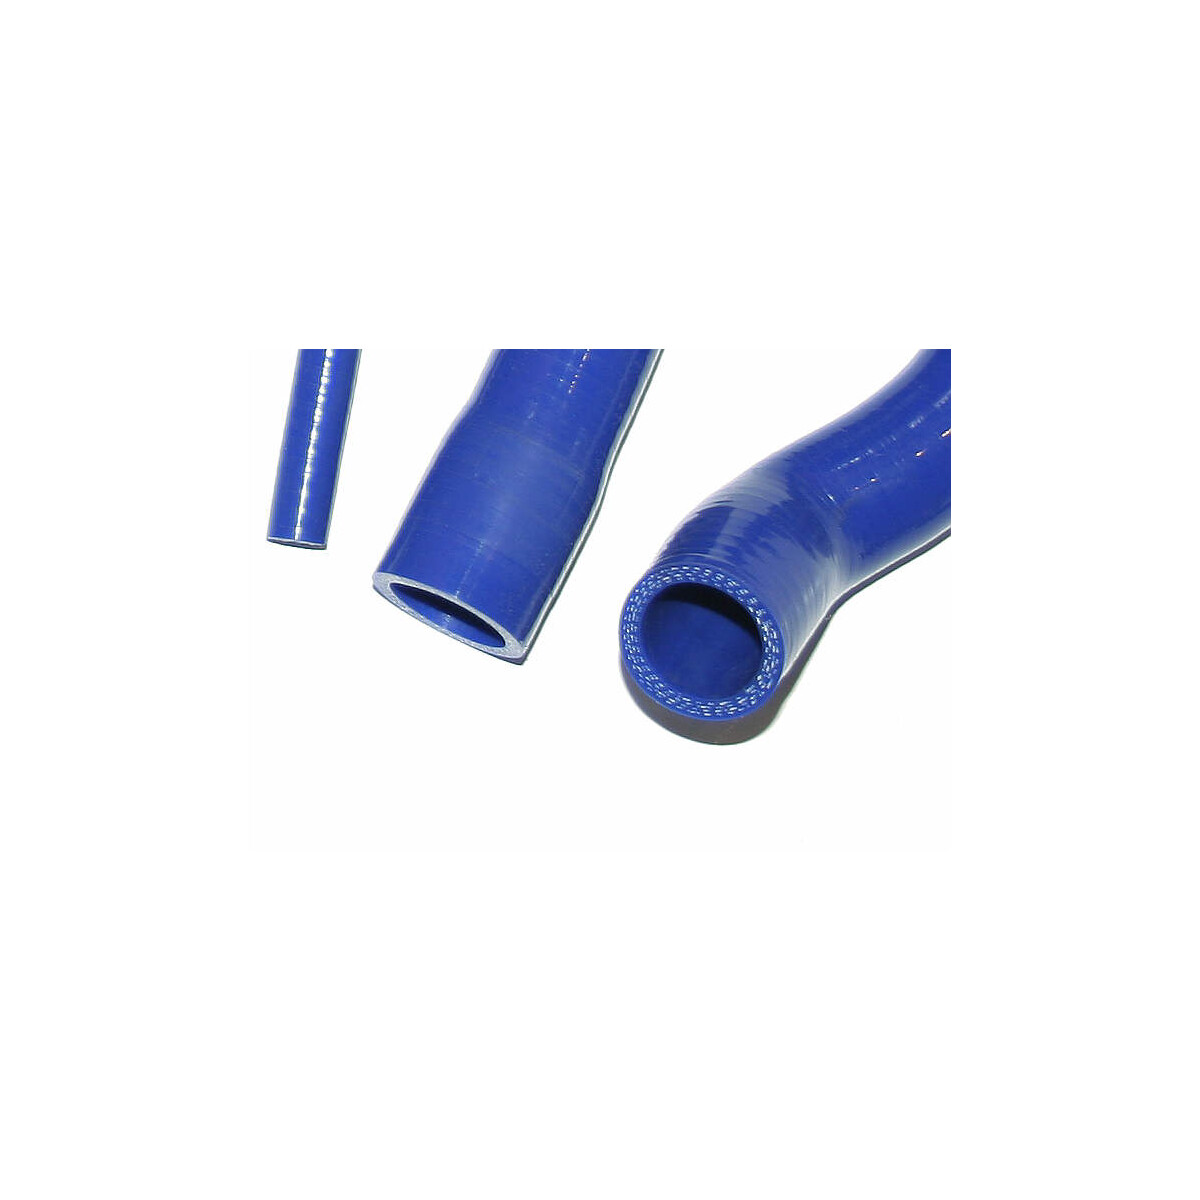 Silicone coolant hose kit for Polo G40 (11 pieces, blue, reinforced)